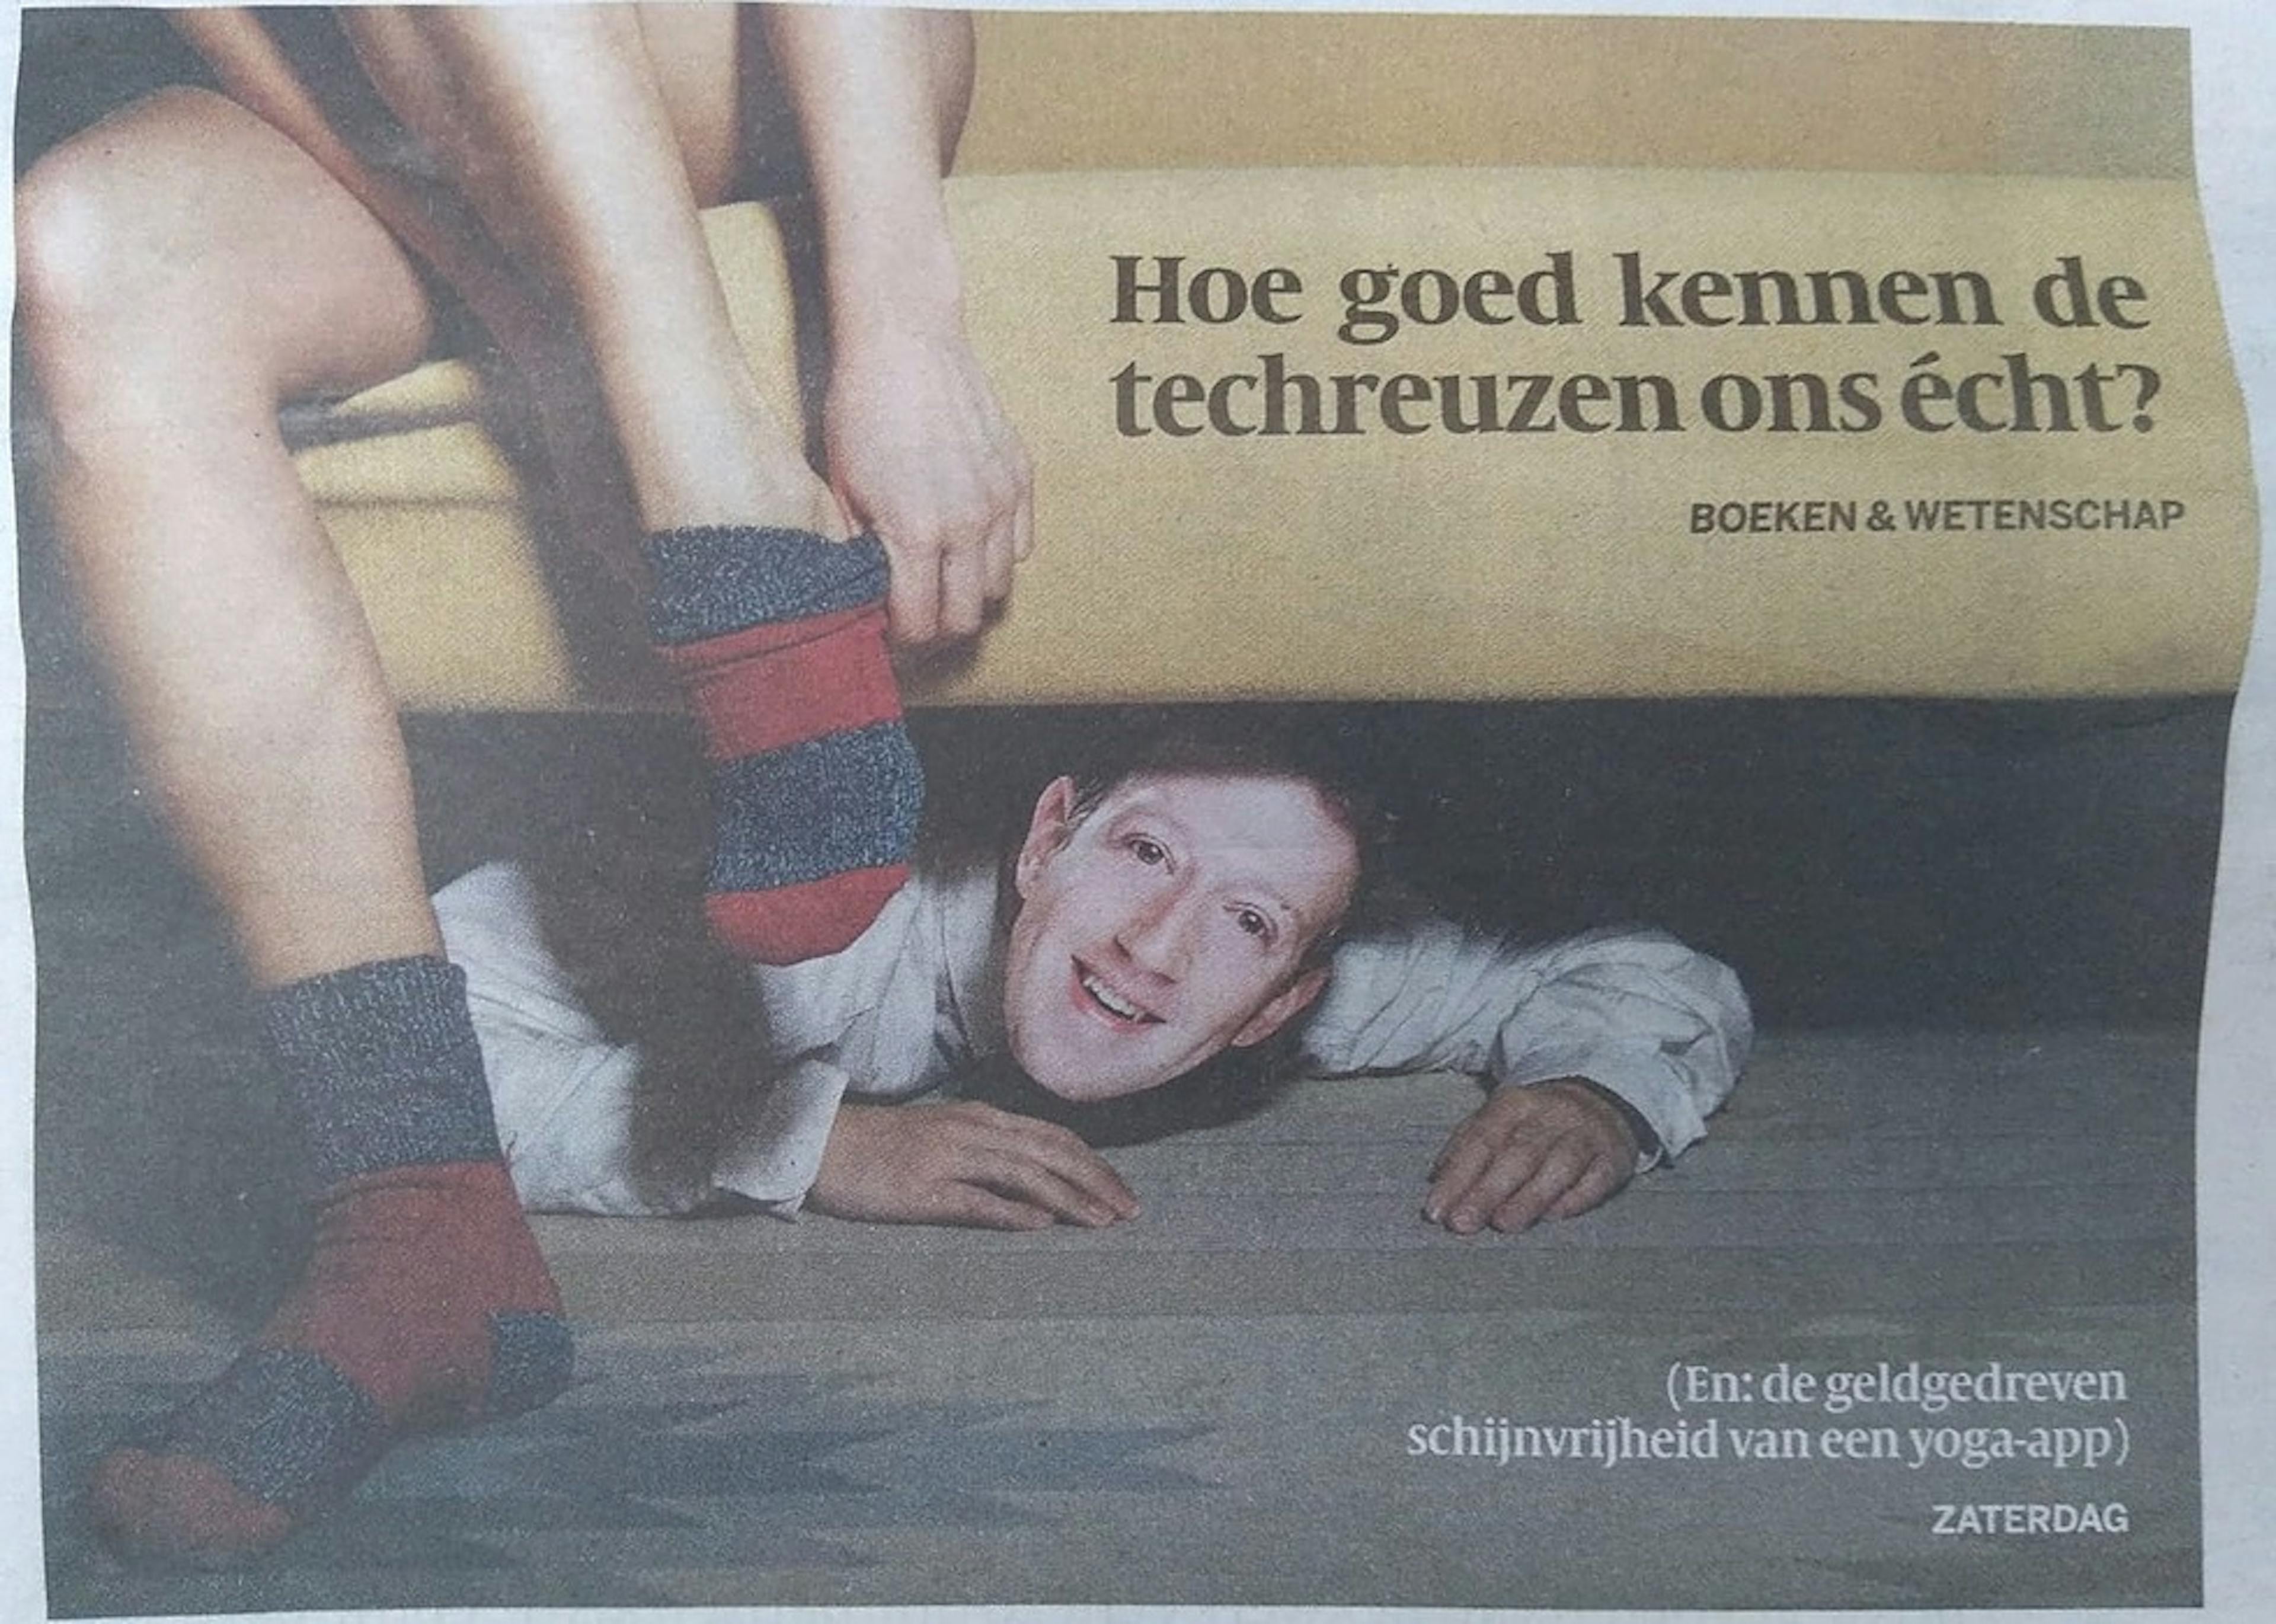 /great-frightening-front-page-creative-from-amsterdam-this-morning-rr7gq34ng feature image